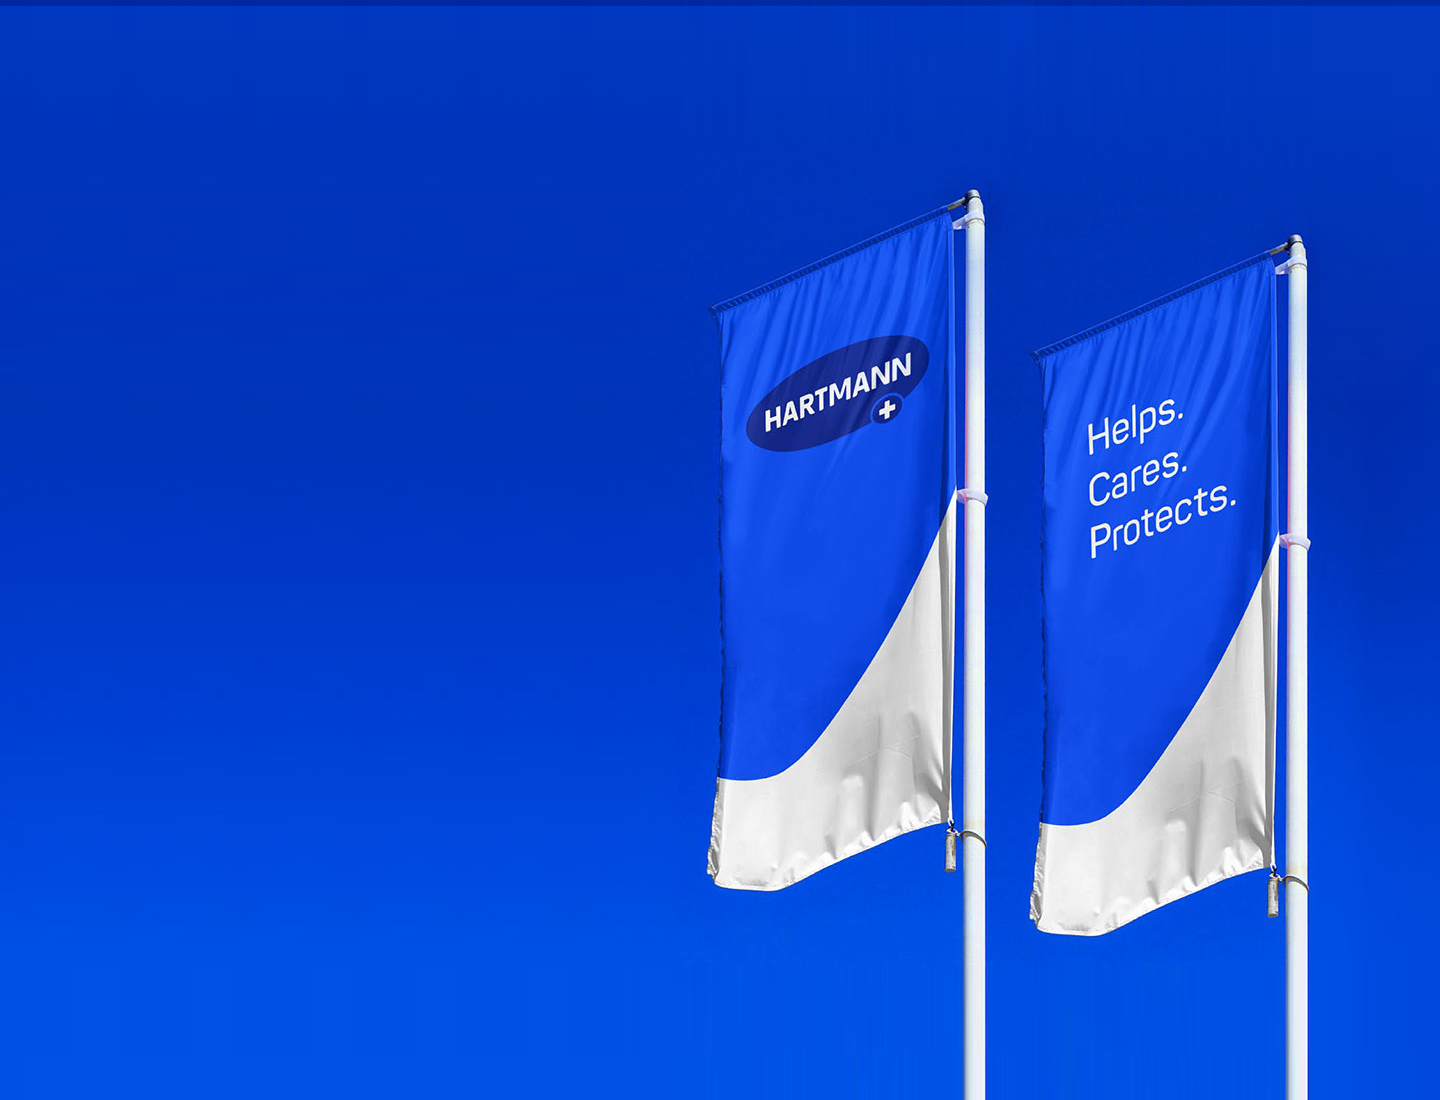 Two blue flags with HARTMANN lettering and the HARTMANN slogan "Helps. Cares. Protects."